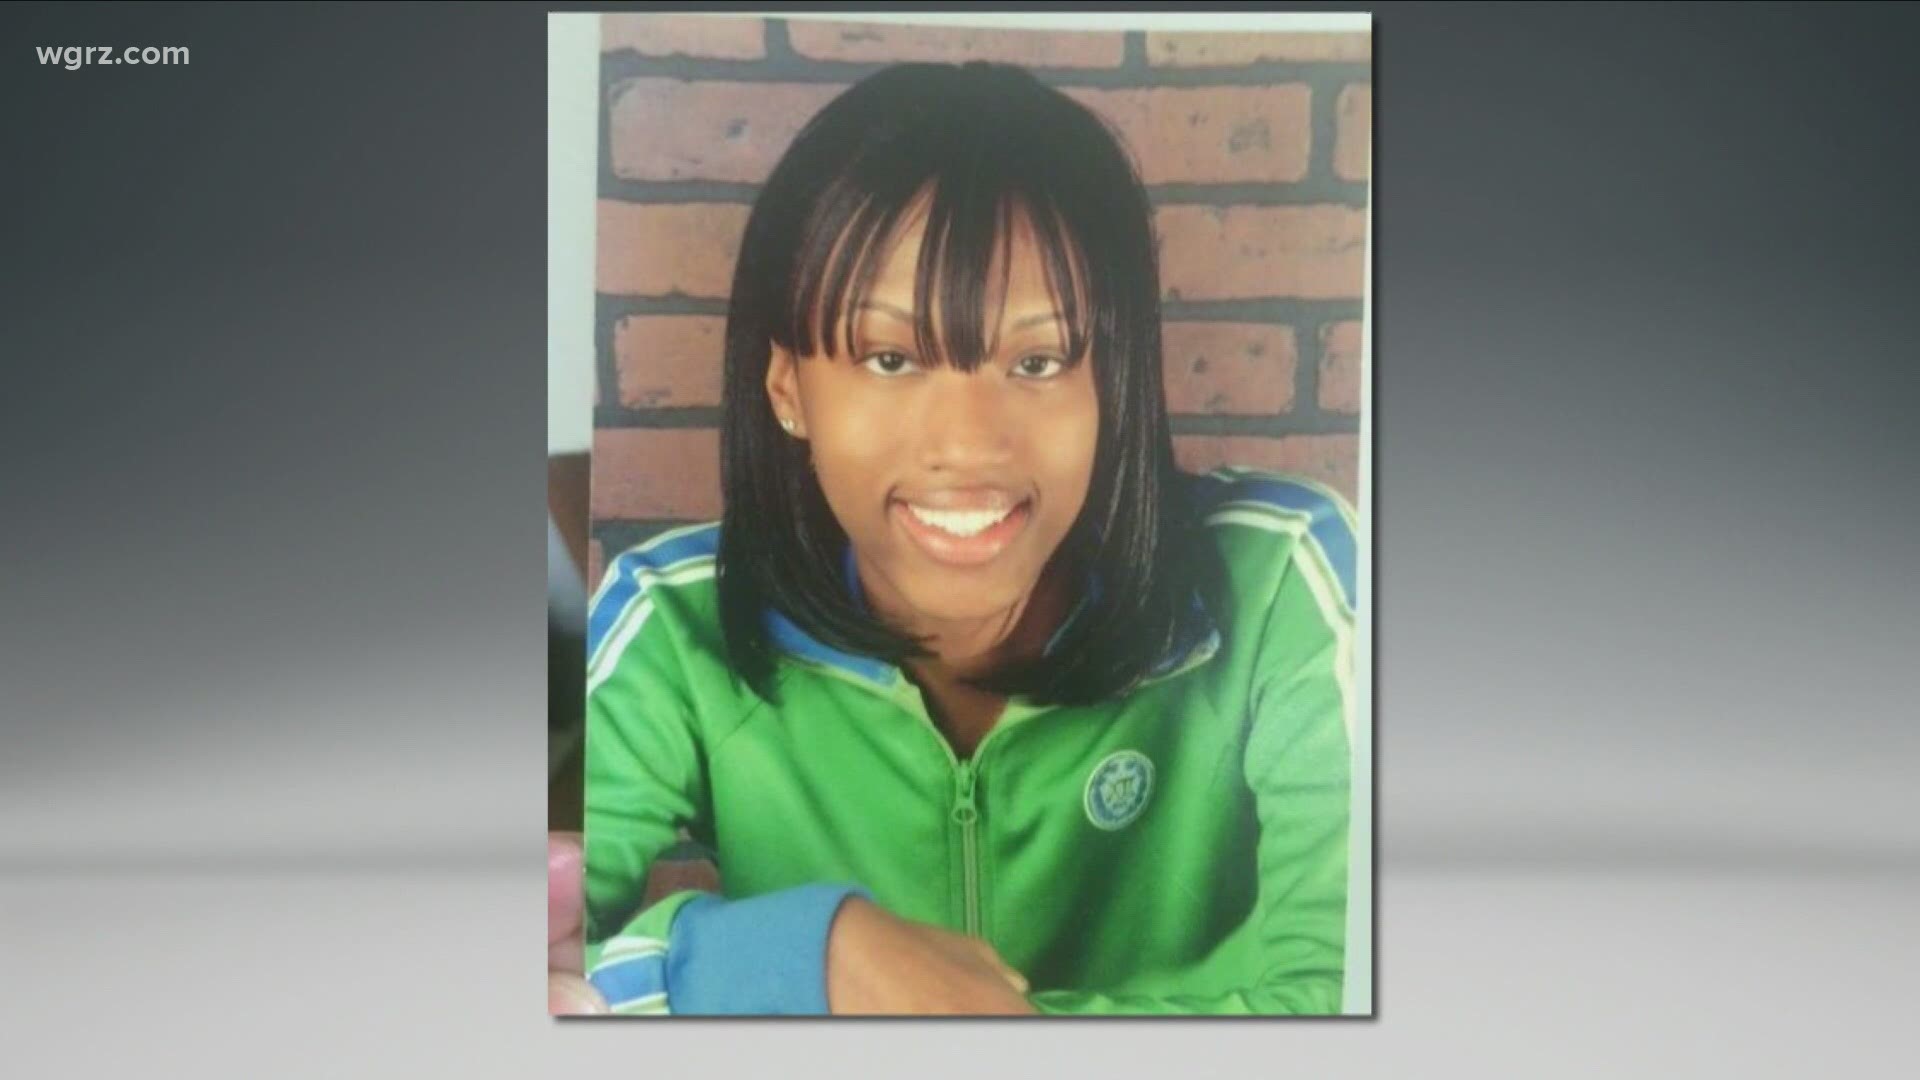 The State Attorney General announced tonight that there will NOT be any charges in the death of India Cummings, who died at the hospital in 2016.